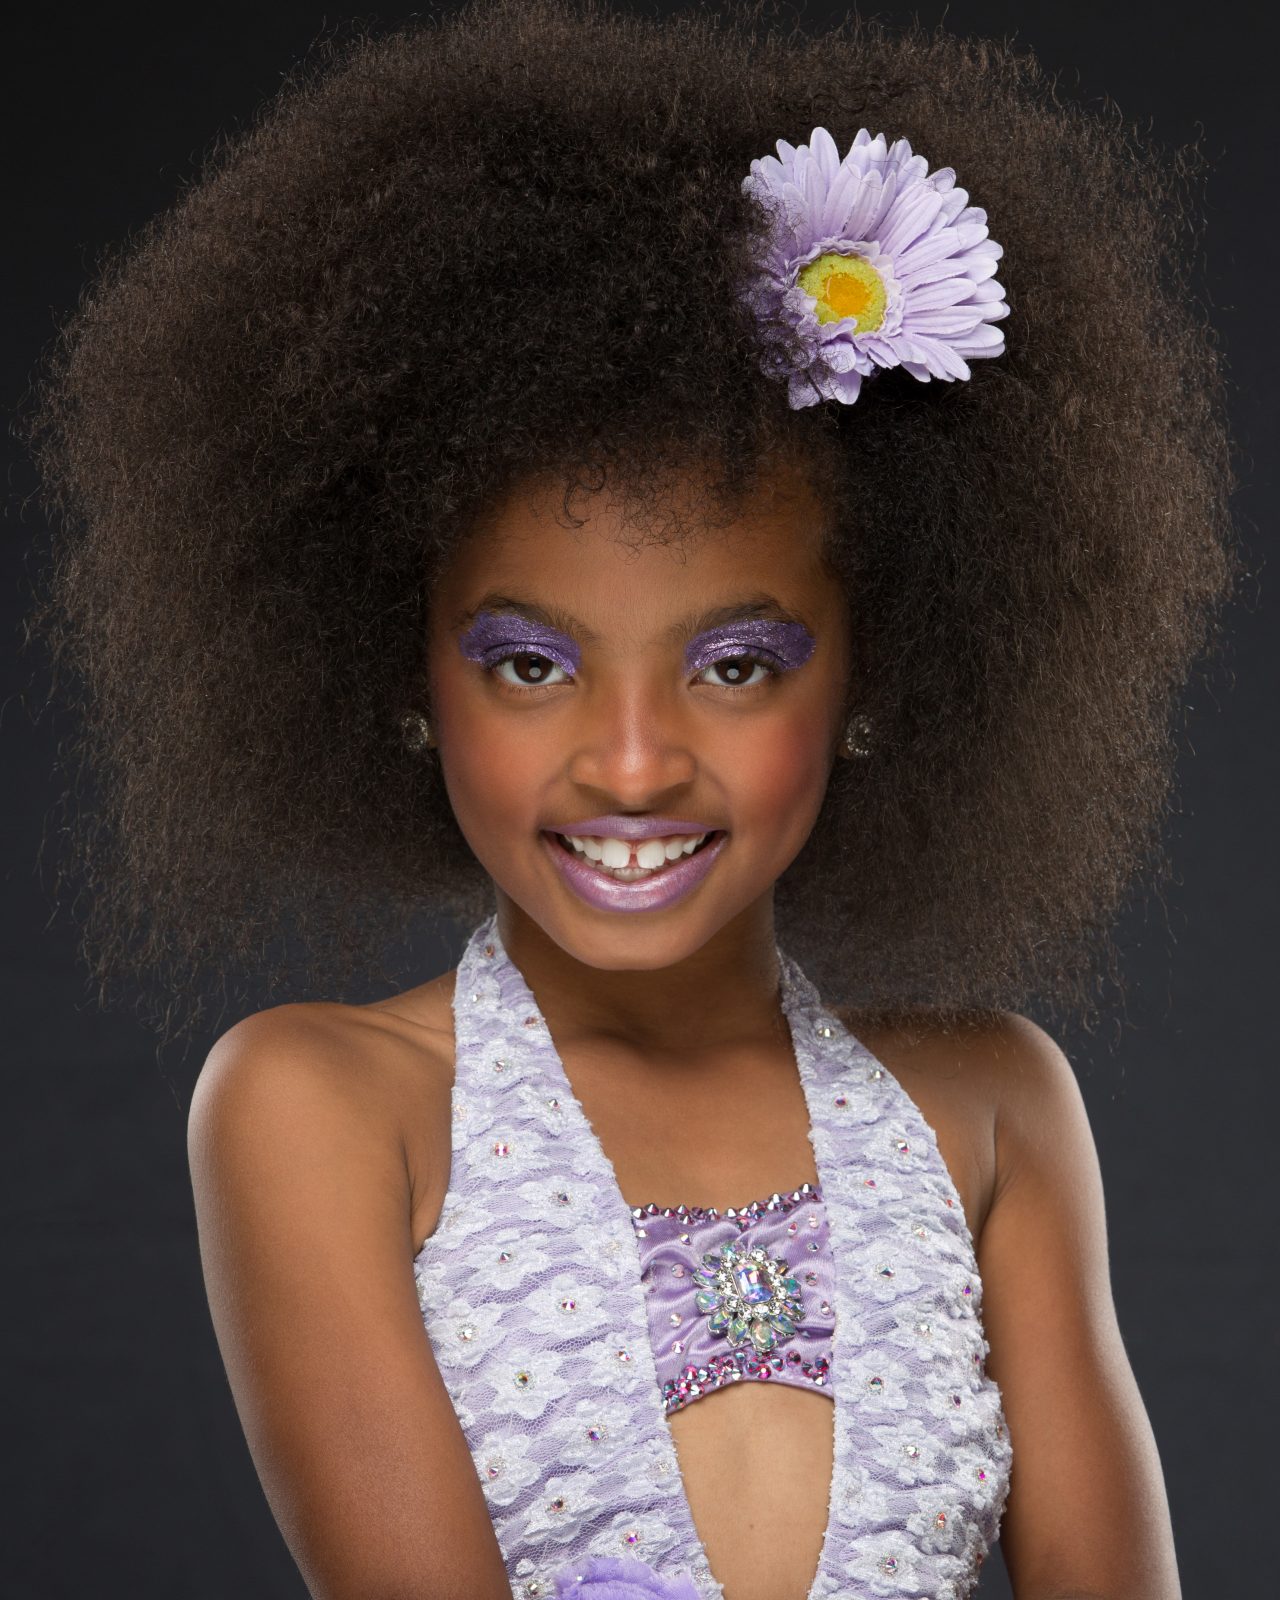 Exulting Images dancer headshot of young girl with a flower in her afro